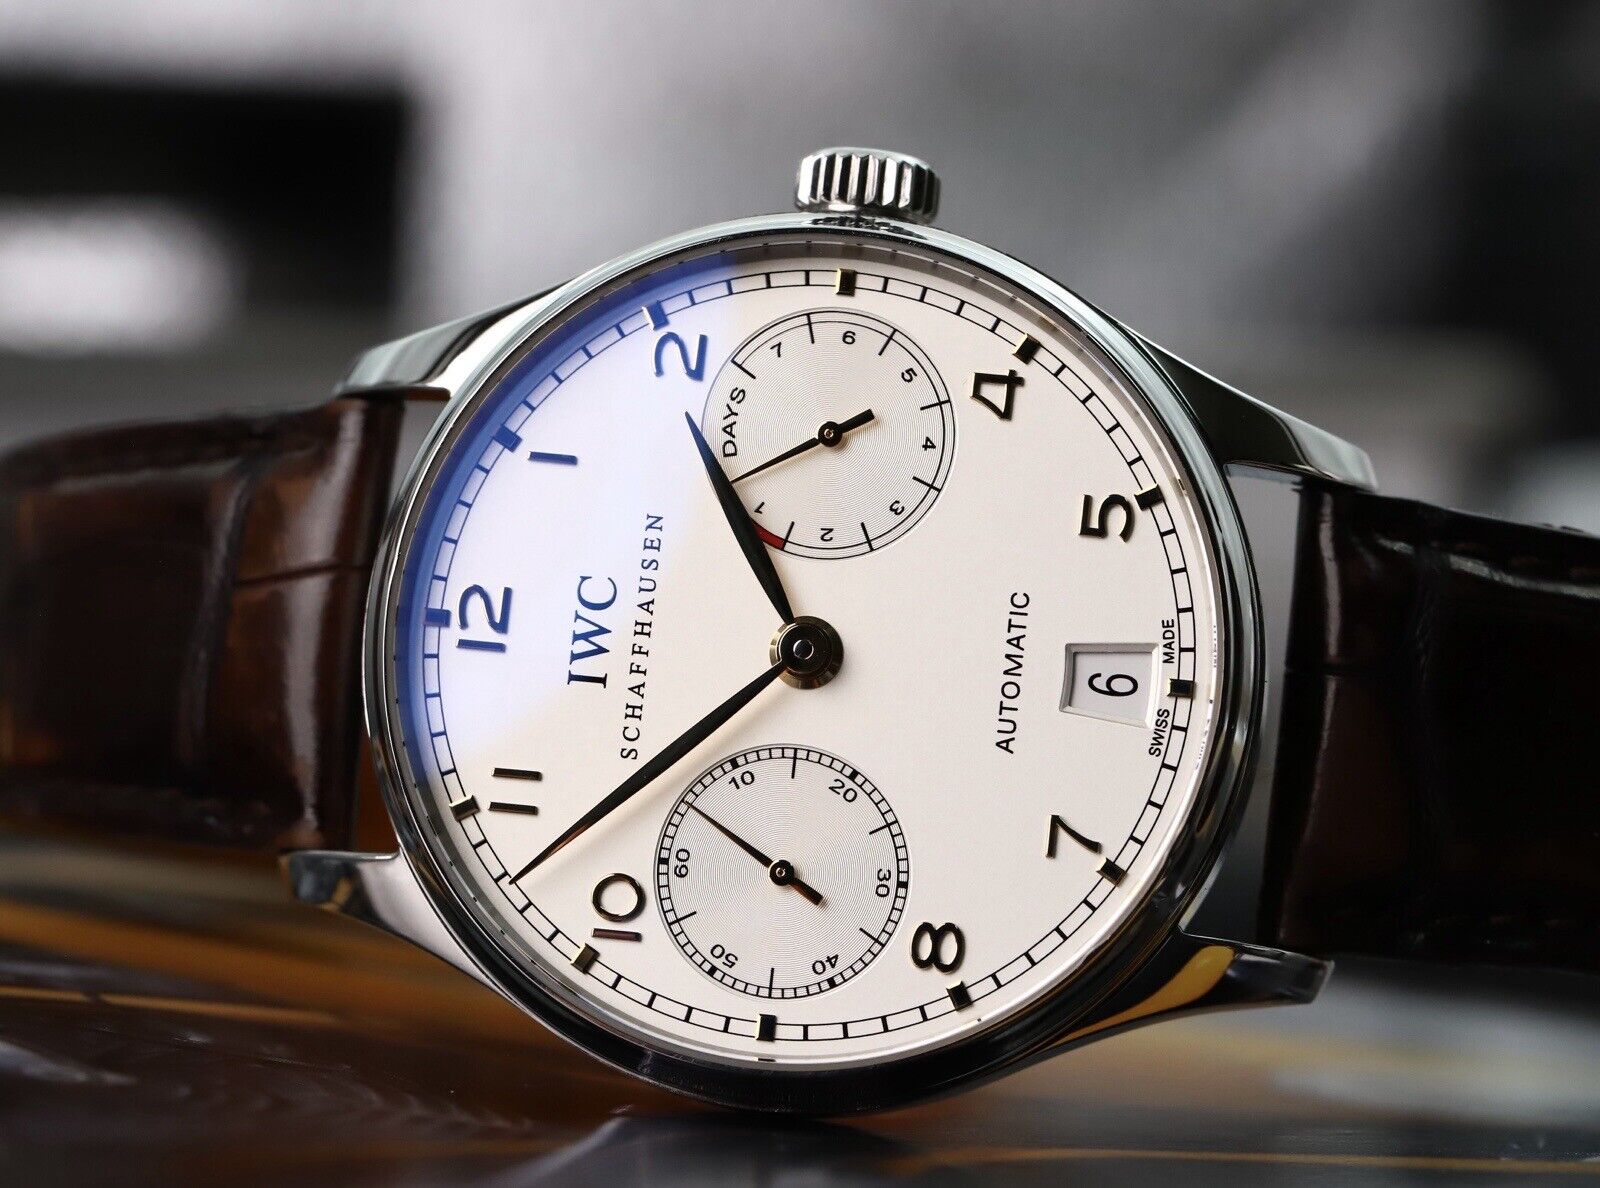 IWCPortuguese7-DaySteelIW500114IW5001-14JustservicedWatchVault02.jpg